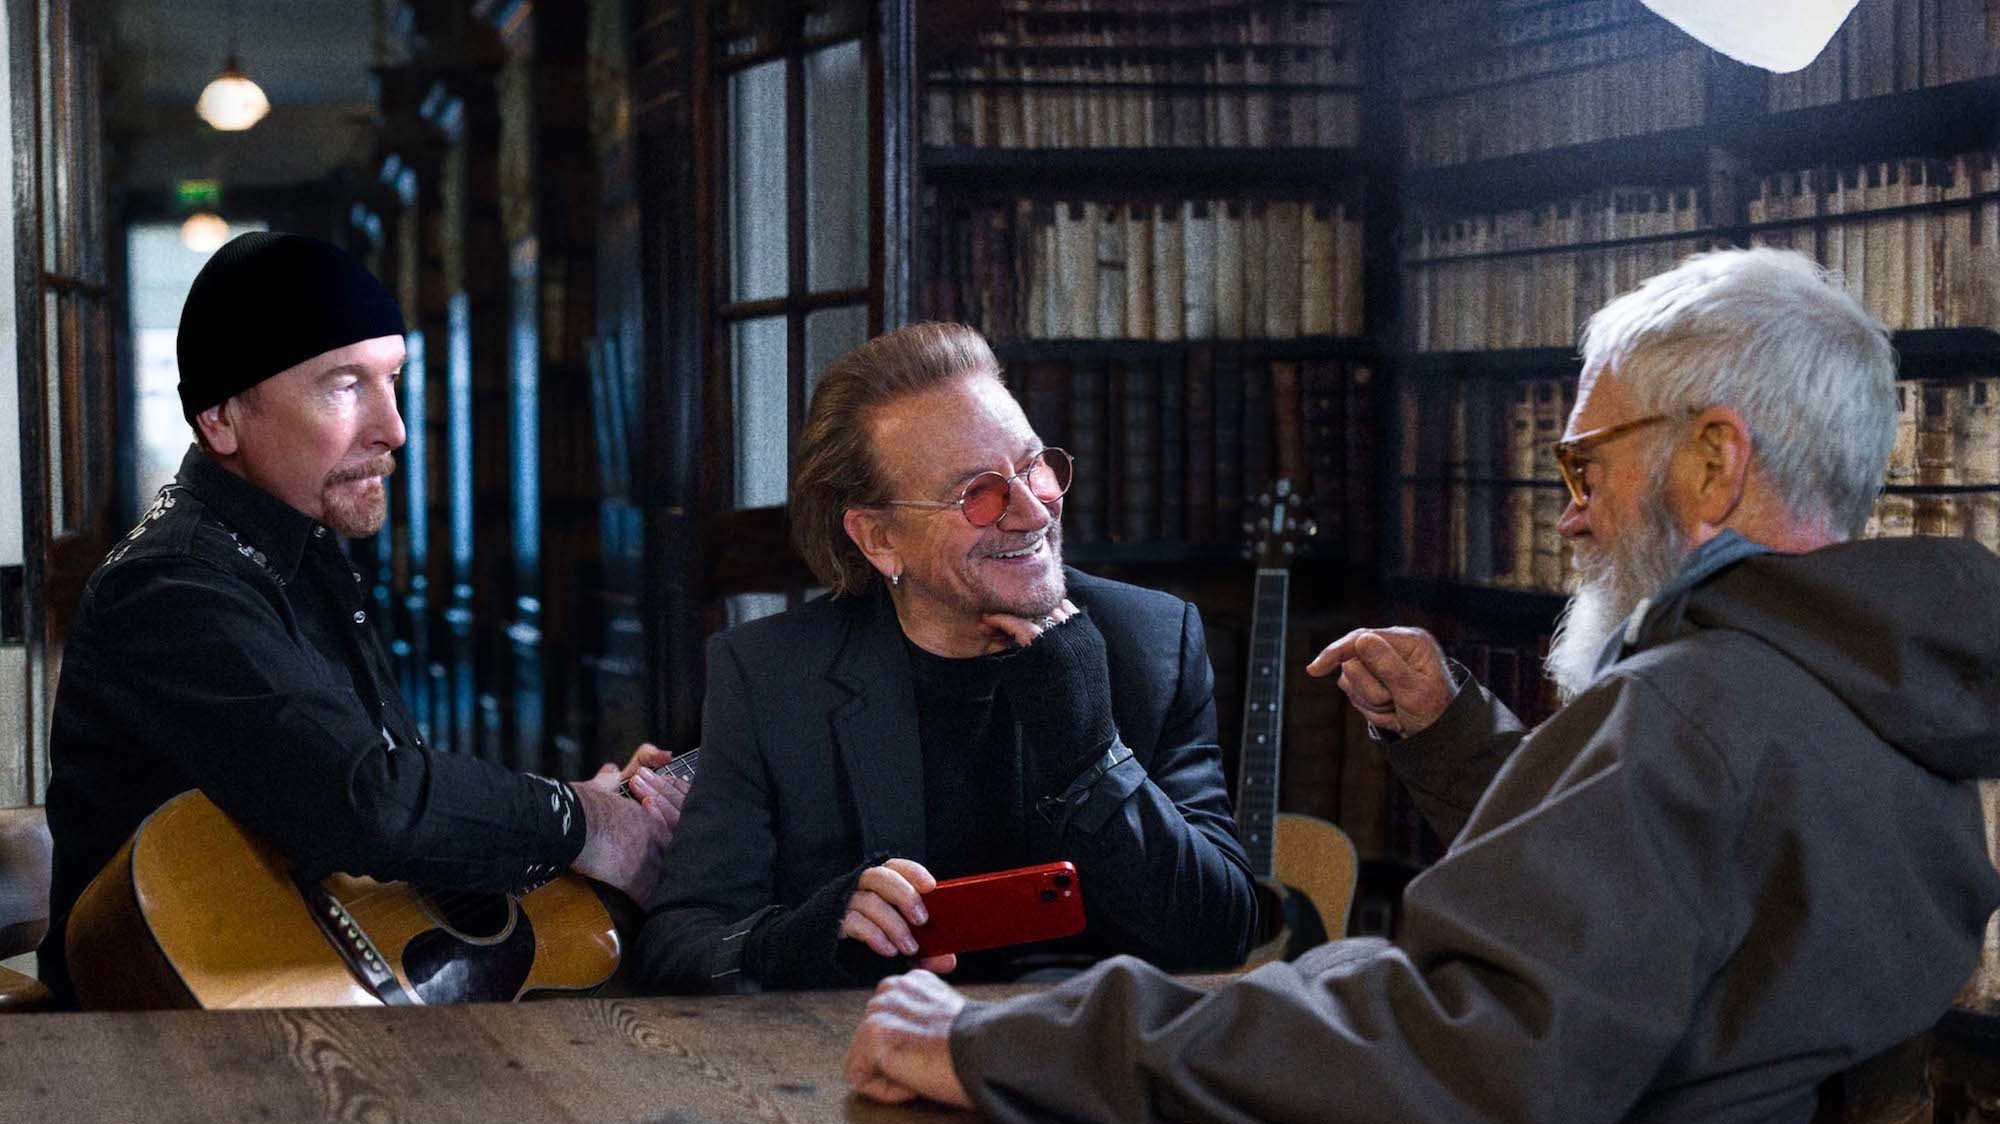 The Edge, Bono and Dave Letterman during an interview in Dublin.  (Disney)